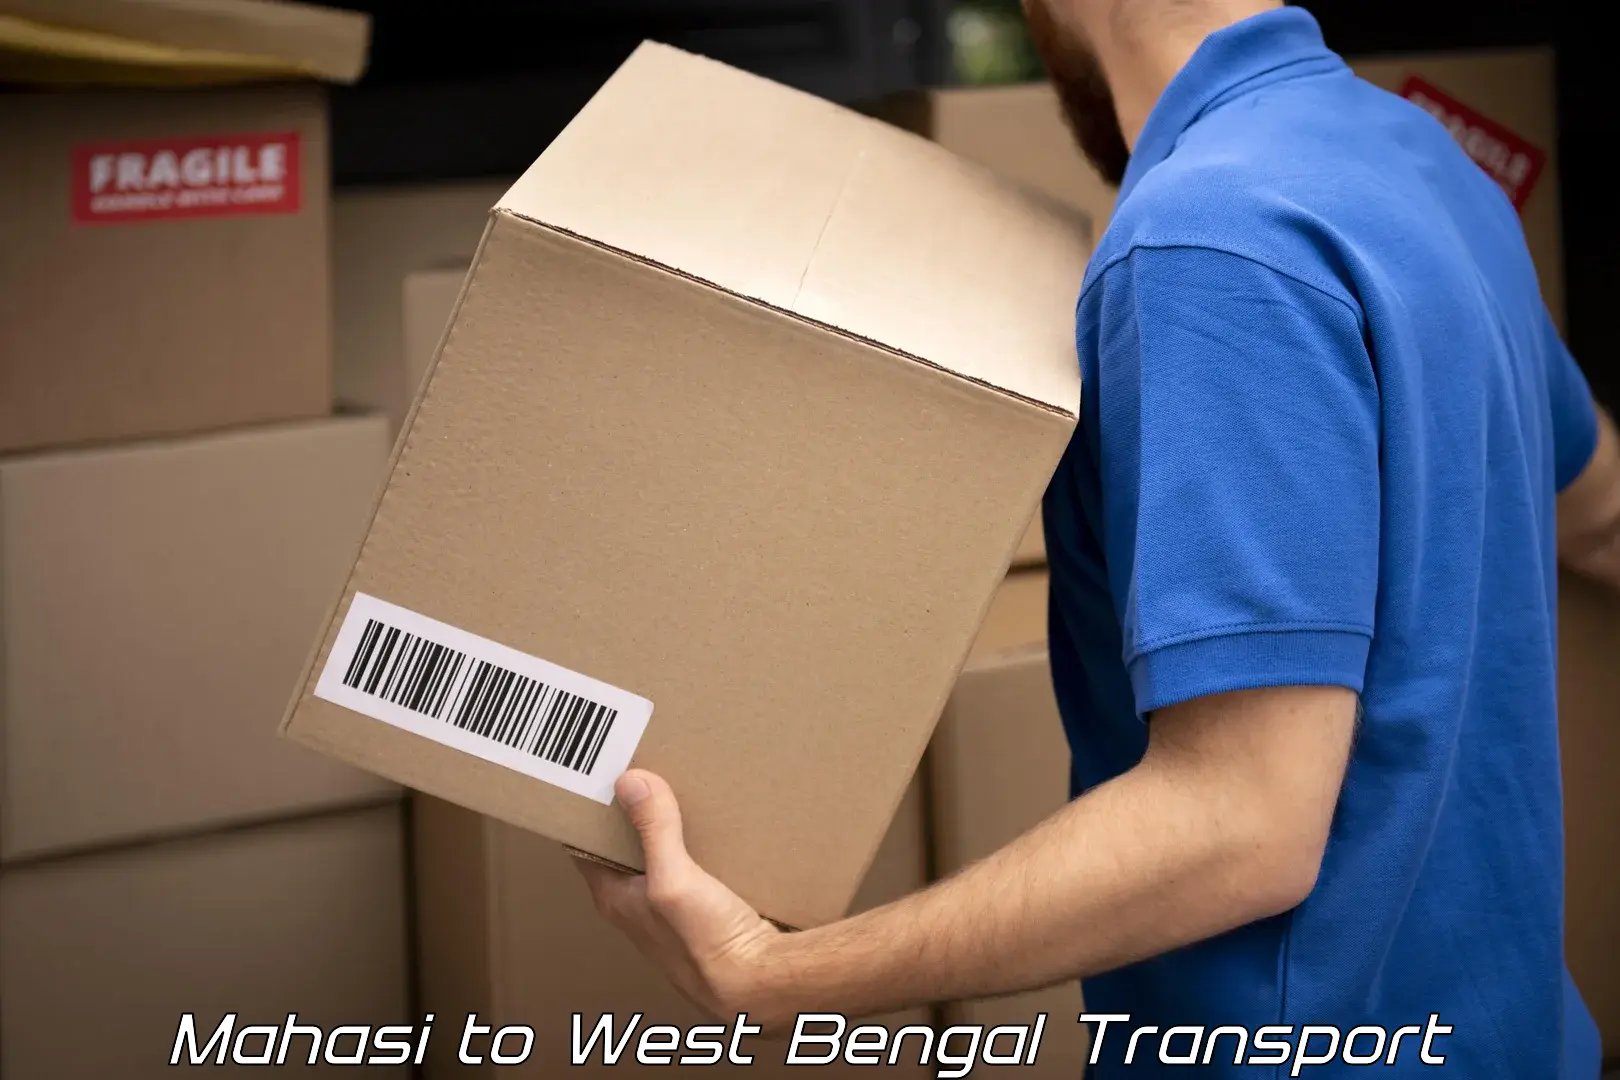 Parcel transport services Mahasi to Barrackpore